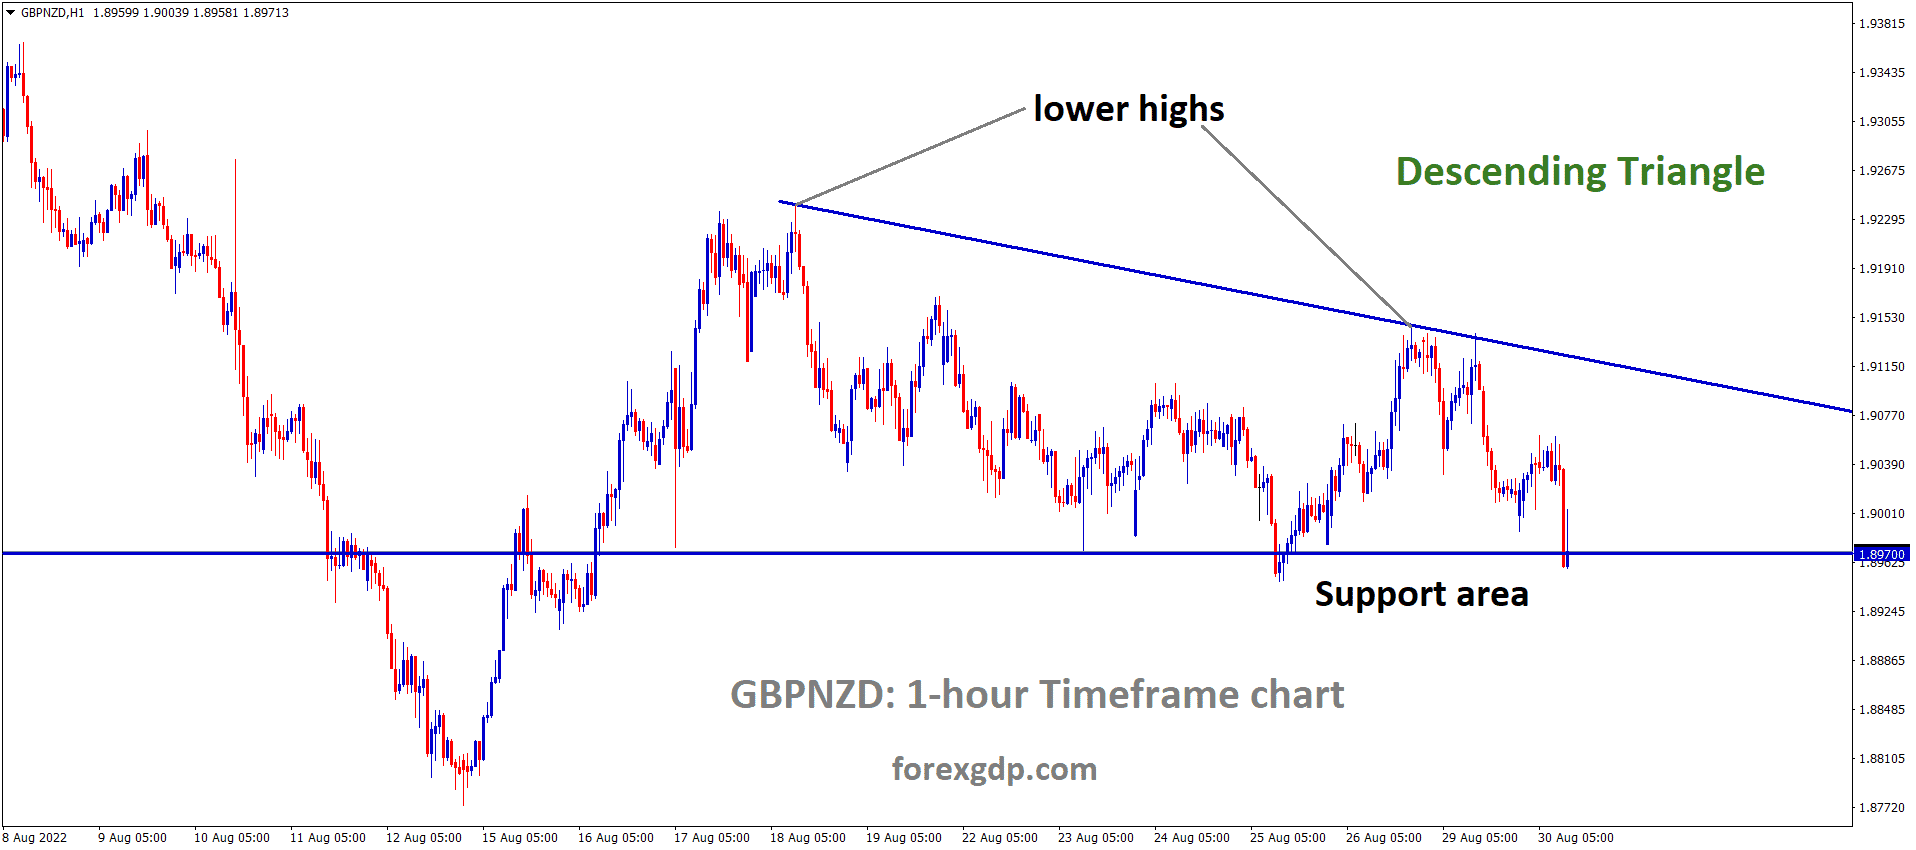 GBPNZD is moving in the Descending triangle pattern and the market has reached the horizontal support area of the pattern.